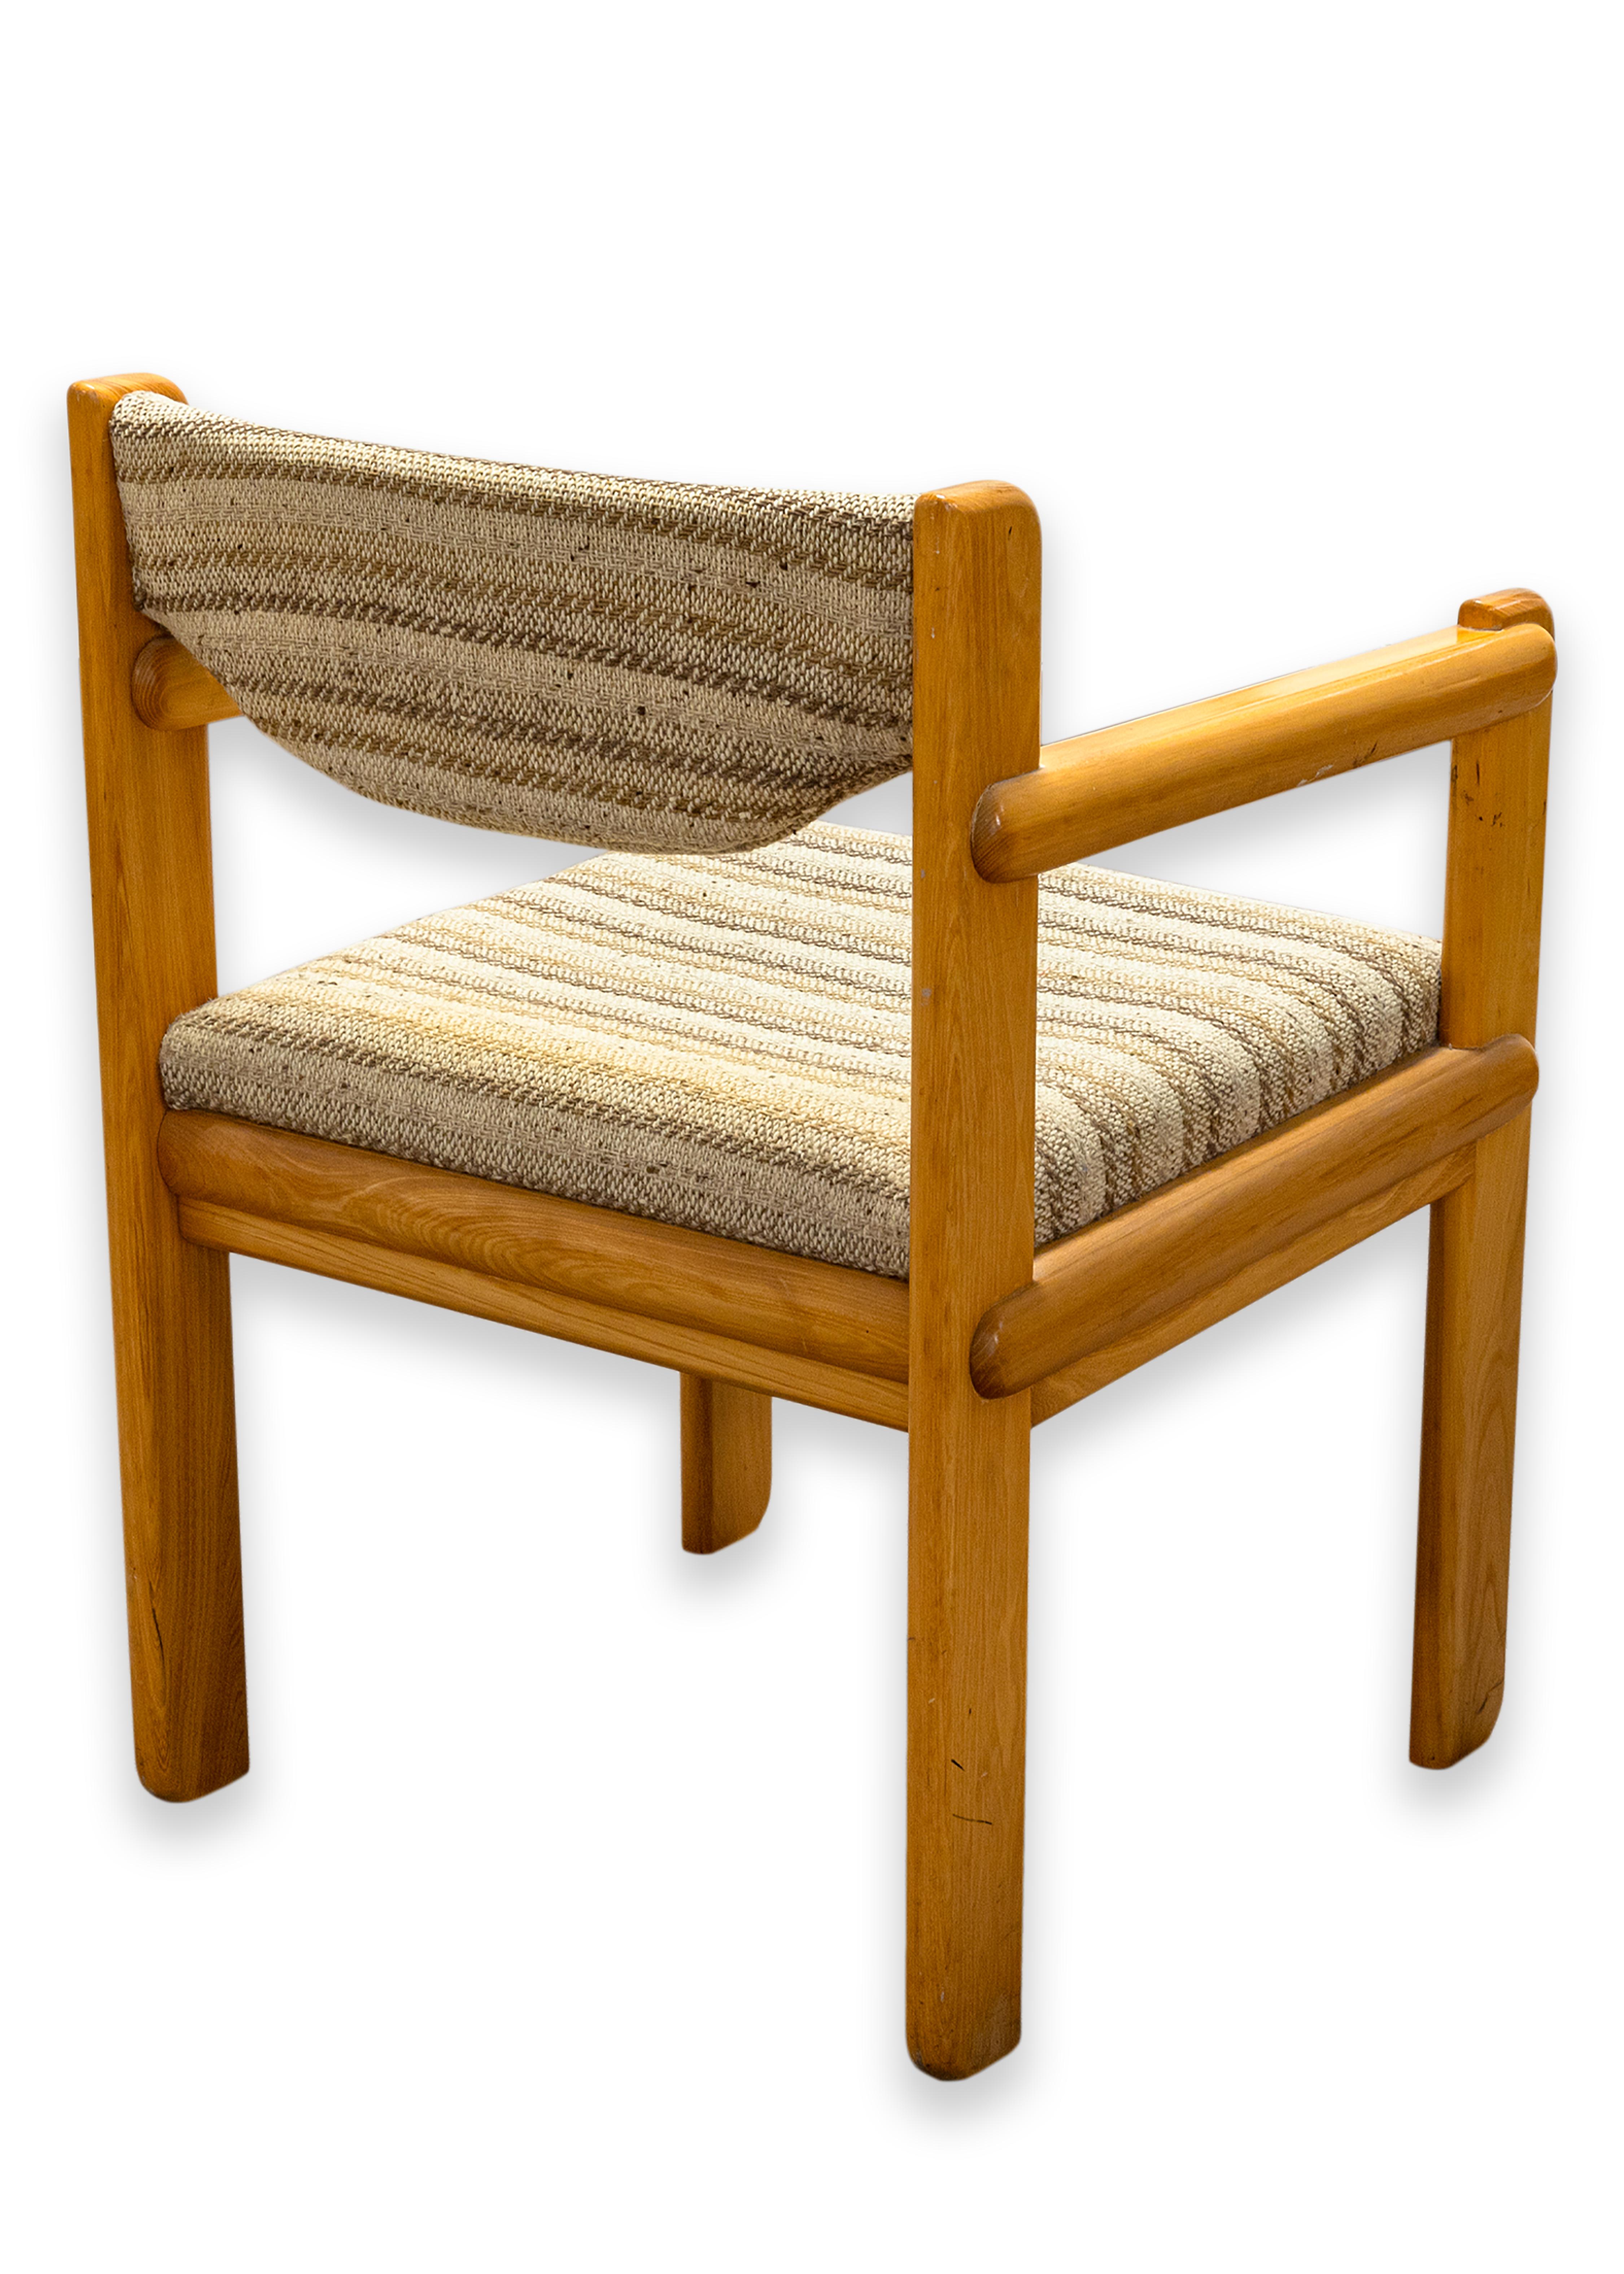 Ralph Rye for Thonet Solid Elm Armchair with Brown Striped Upholstery Fabric In Good Condition For Sale In Keego Harbor, MI